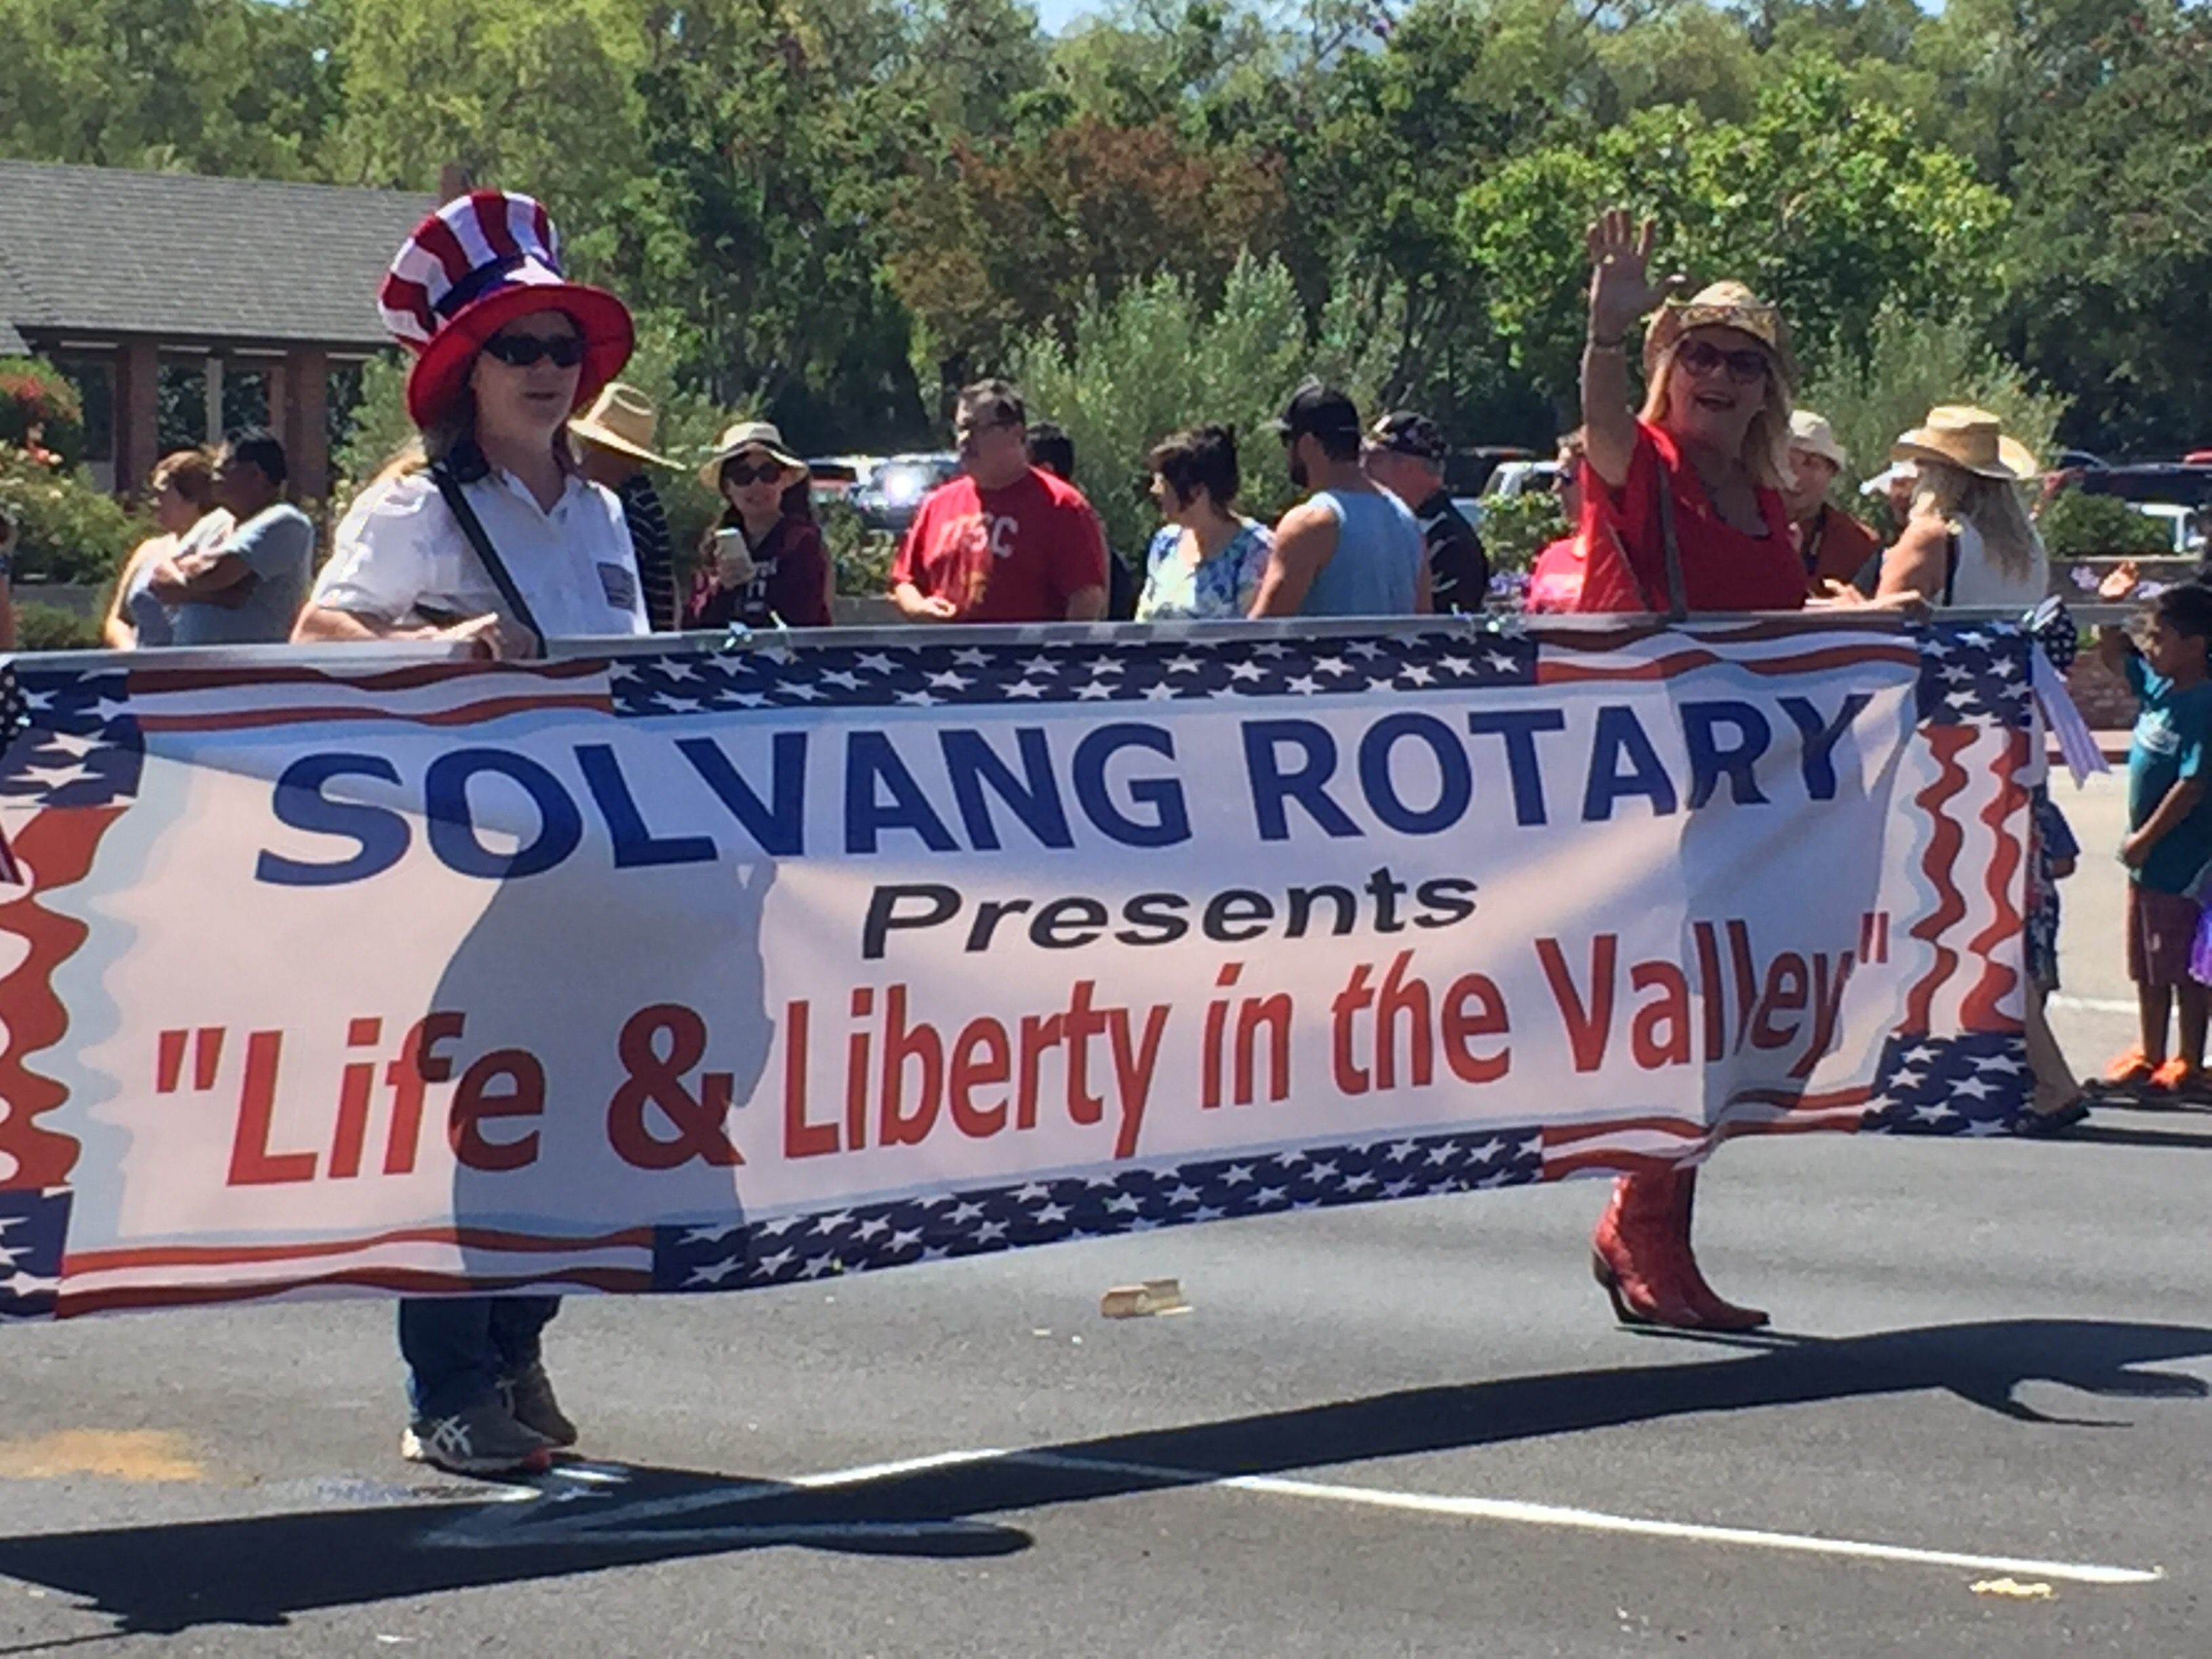 Fourth of July Parade celebrates “Life and Liberty in the Valley”